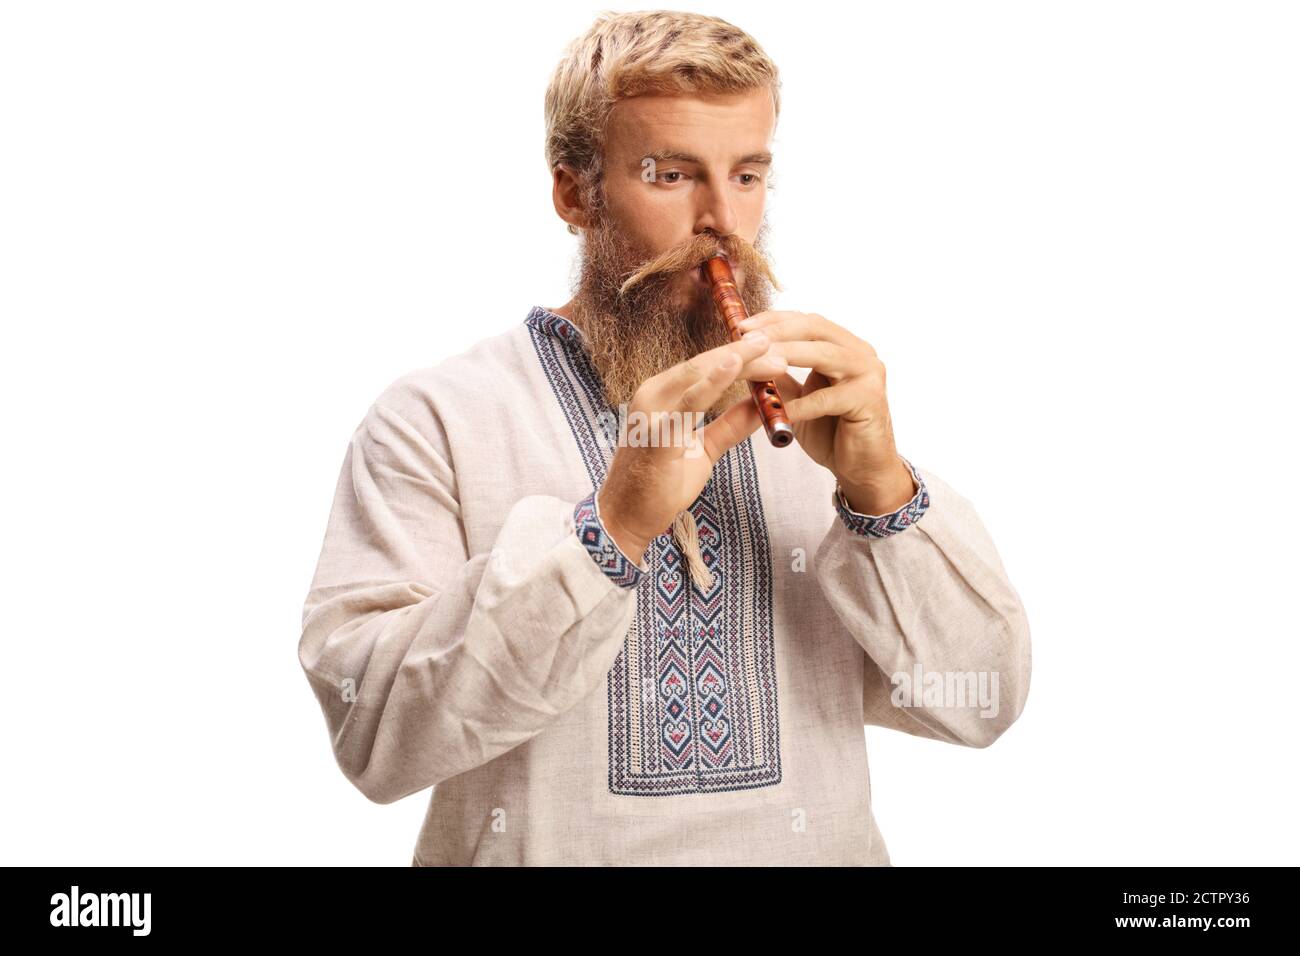 Bearded man in ethnic clothes playing a wooden flute isolated on white background Stock Photo